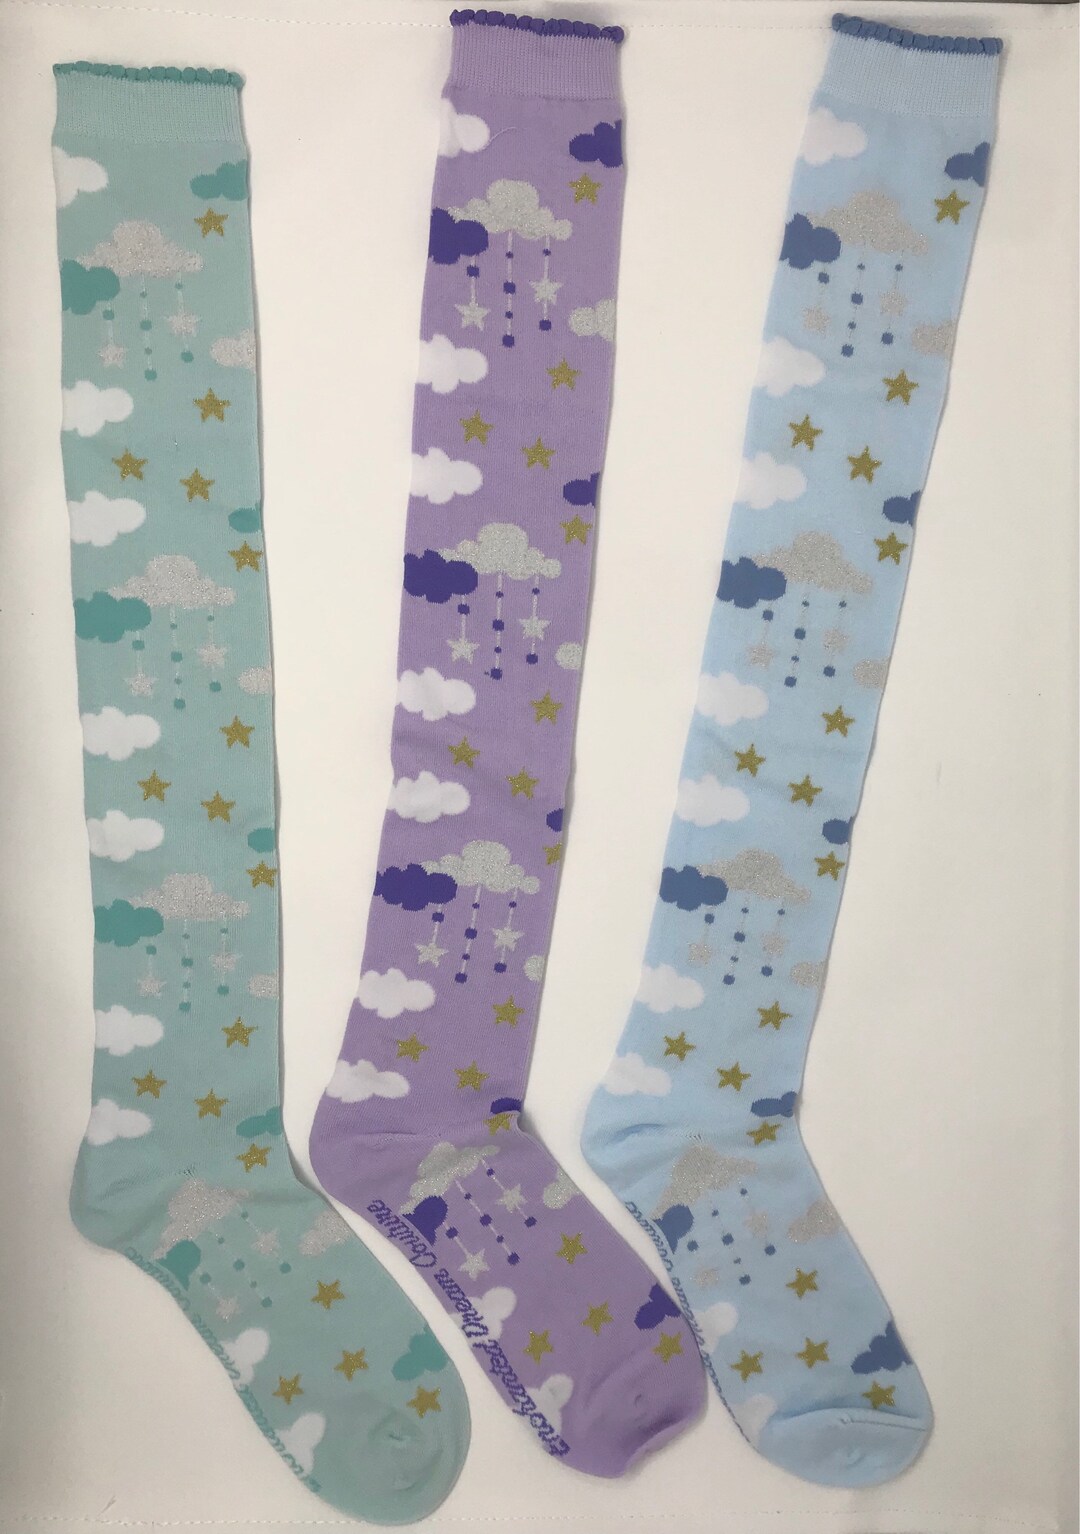 Lolita Star Clouds Over the Knee Socks. - Etsy